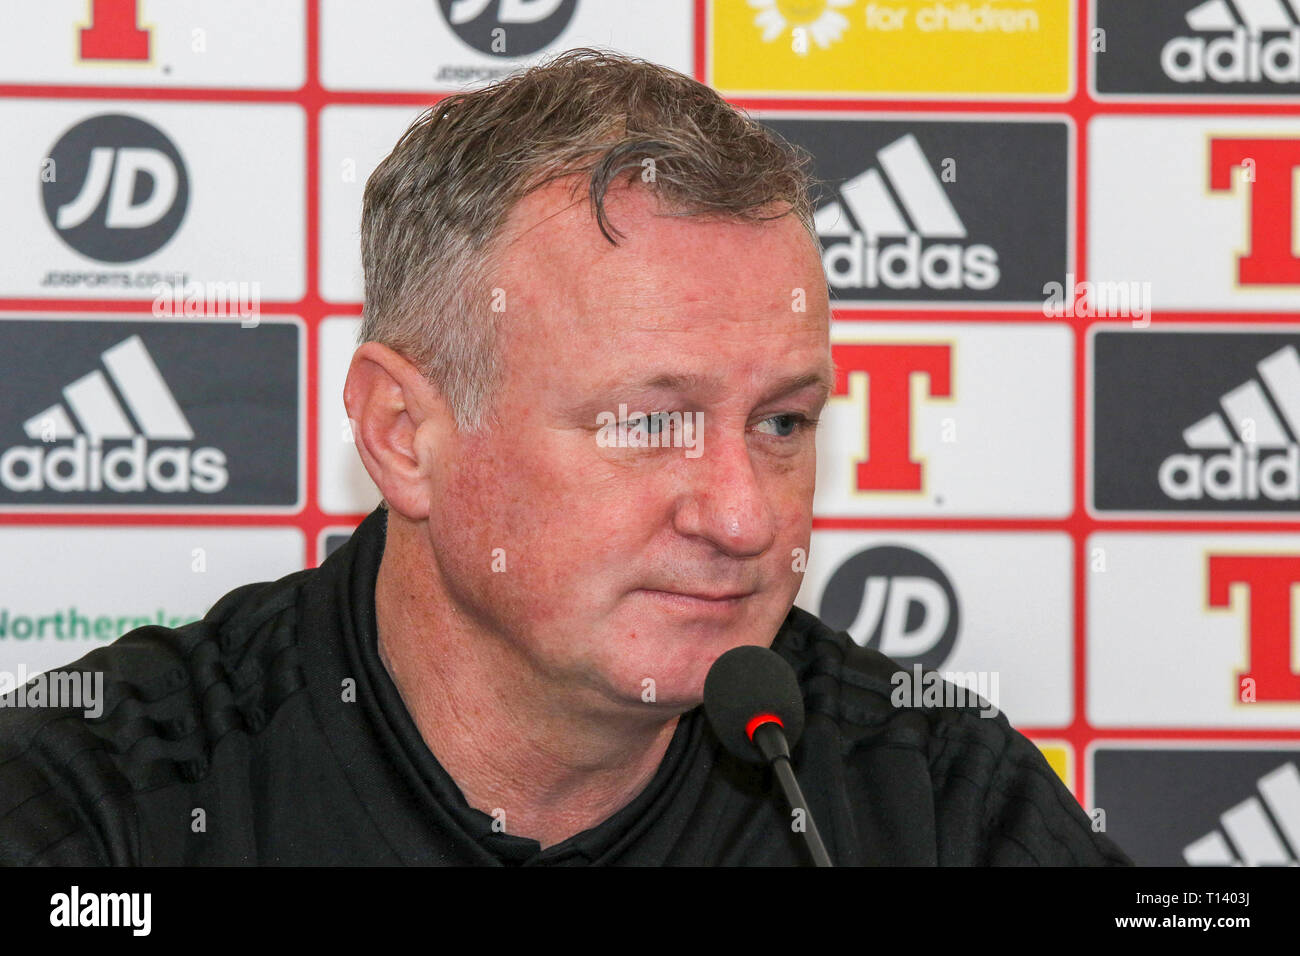 Windsor Park, Belfast, Northern, Ireland. 23rd Mar, 2019. Northern Ireland manager Michael O'Neill at today's press conference in Belfast. Northern Ireland play Belarus at Windsor Park tomorrow evening in their second UEFA EURO 2020 Qualifying game. On Friday night Northern Ireland defeated Estonia 2-0 in their first qualifying game. Credit: David Hunter/Alamy Live News Stock Photo